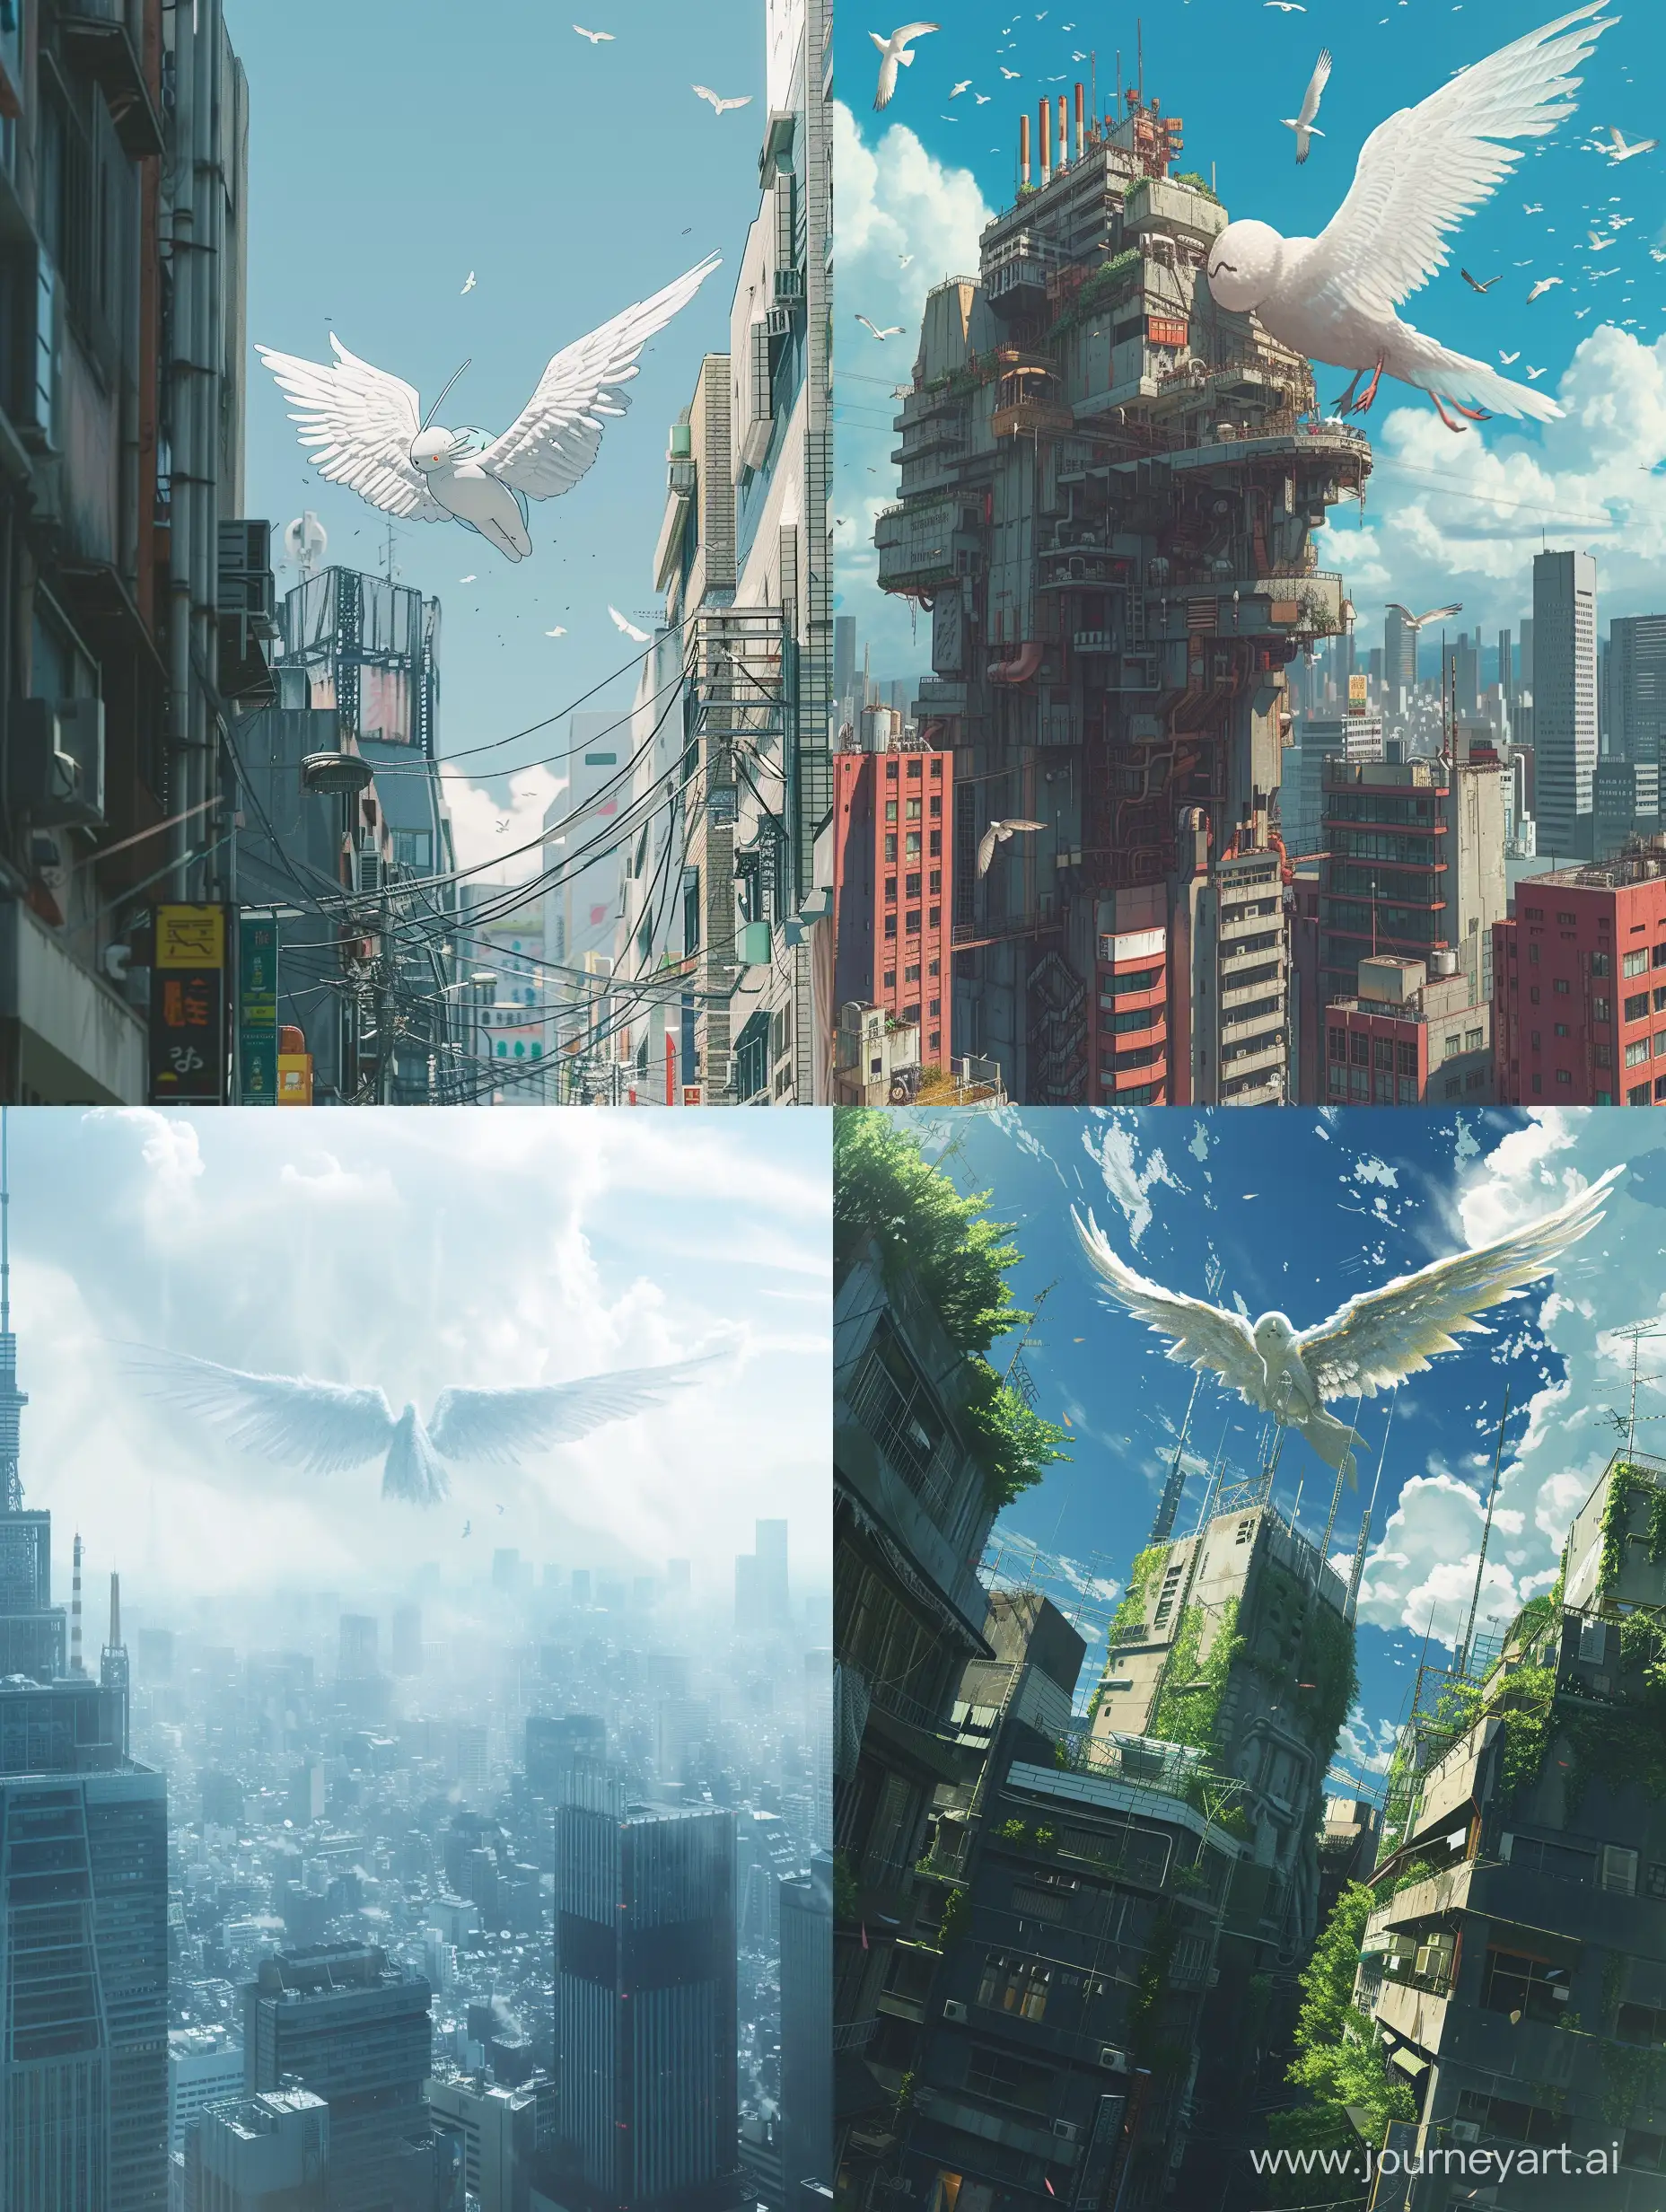 A picture of Brutalism Flying object or angel over tokyo by Studio Ghibli Art Style